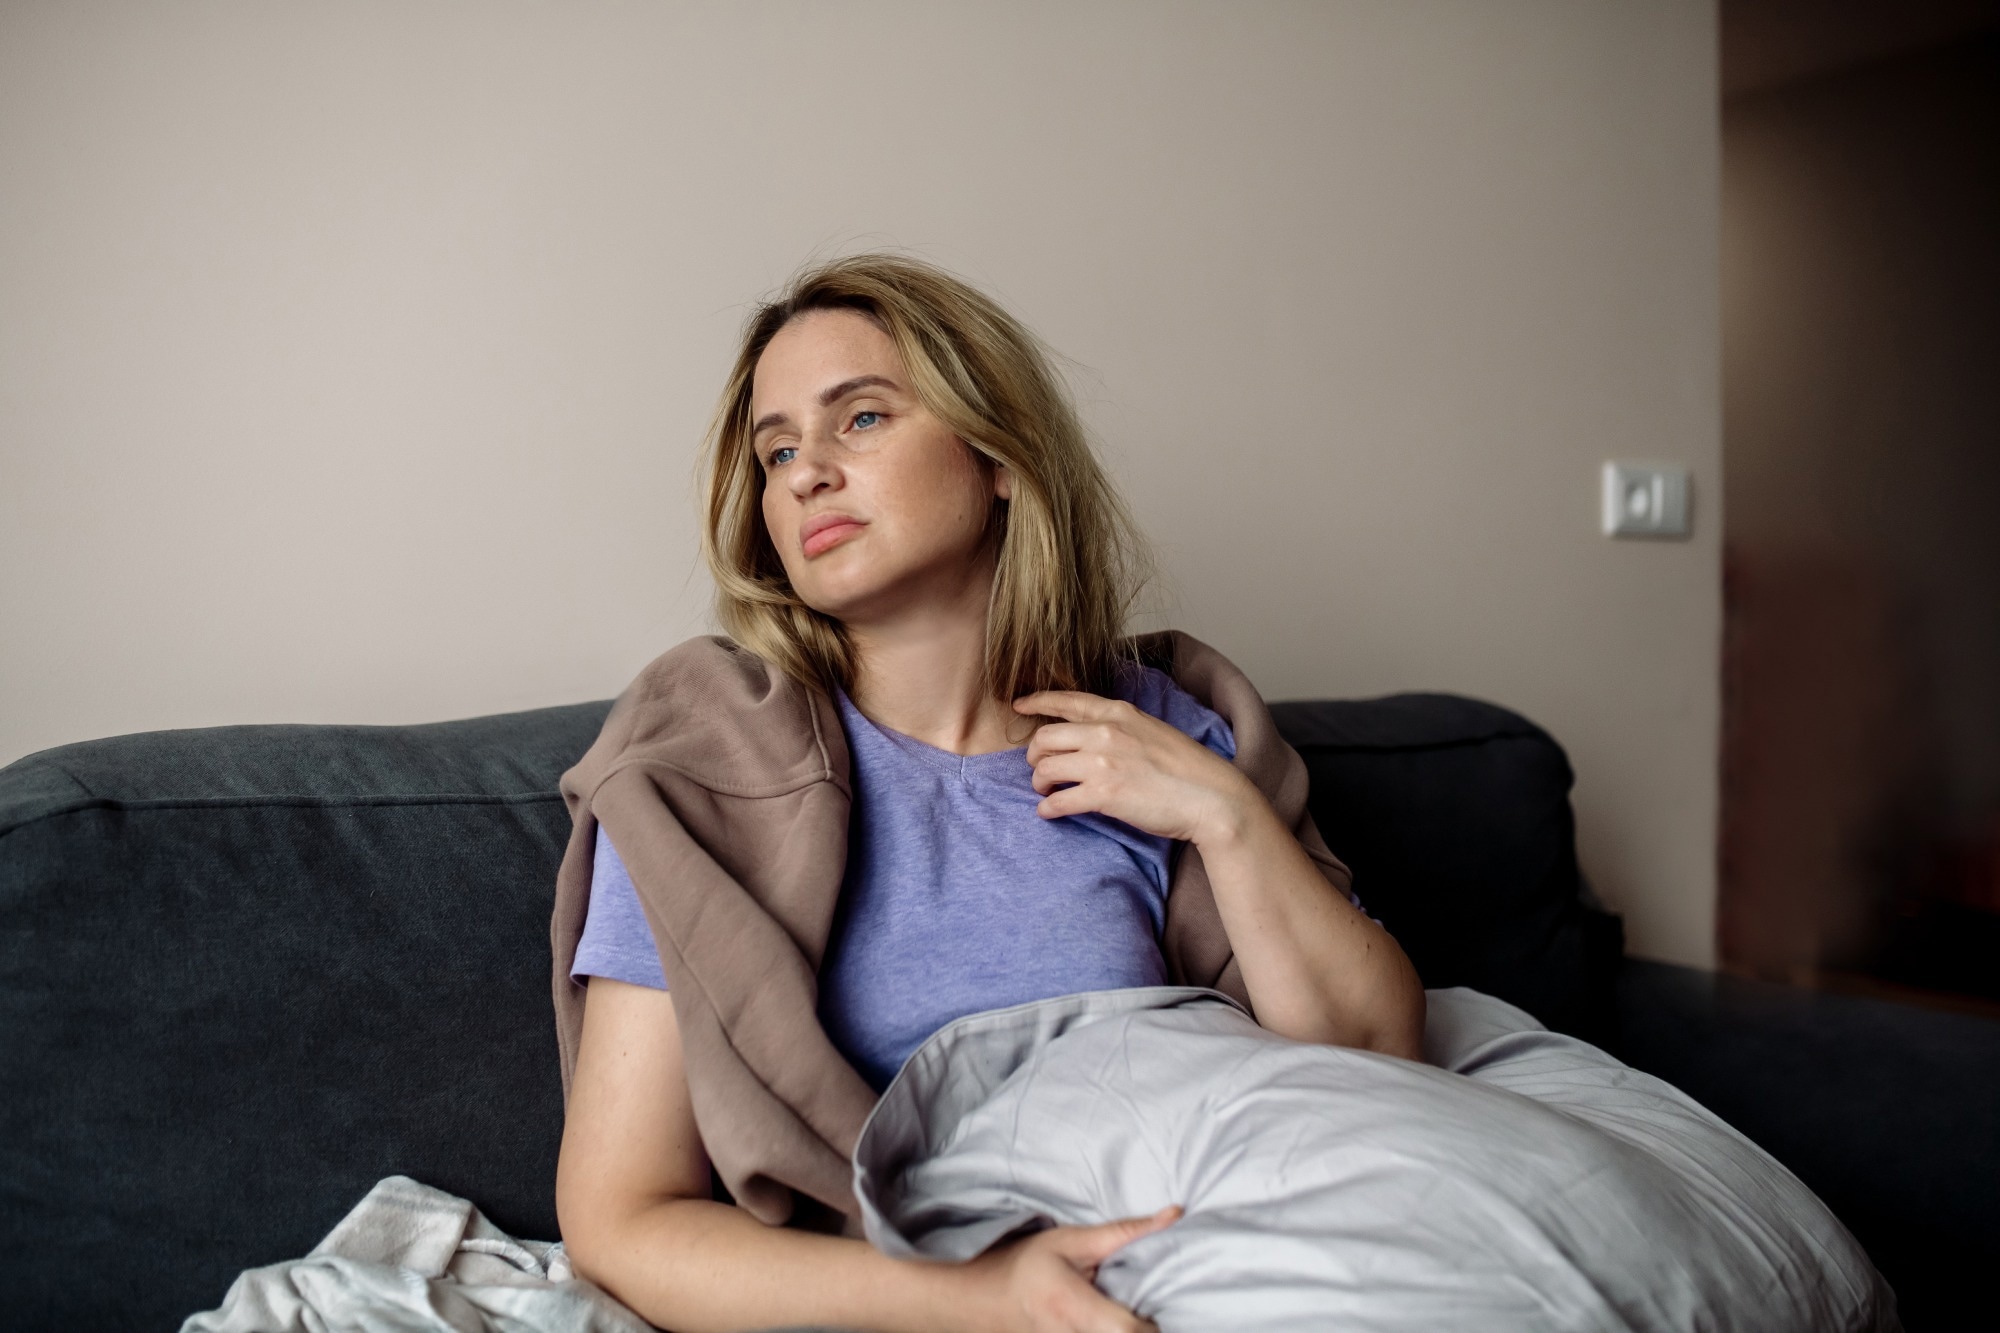 Study: Long-term symptom severity and clinical biomarkers in post-COVID-19/chronic fatigue syndrome: results from a prospective observational cohort. Image Credit: Starocean/Shutterstock.com